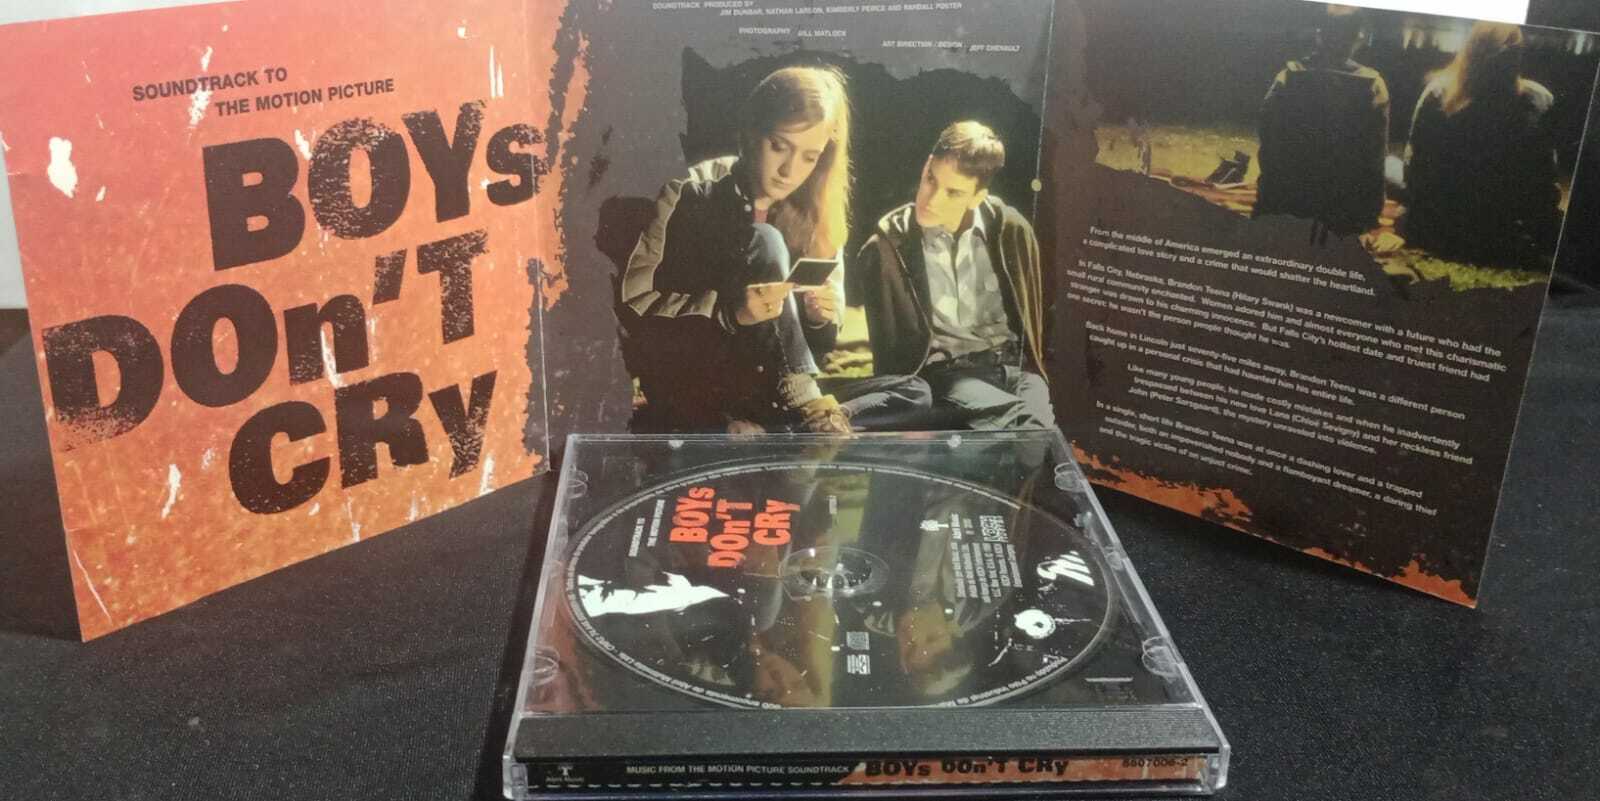 CD - Boys Dont Cry - Music From The Motion Picture Soundtrack